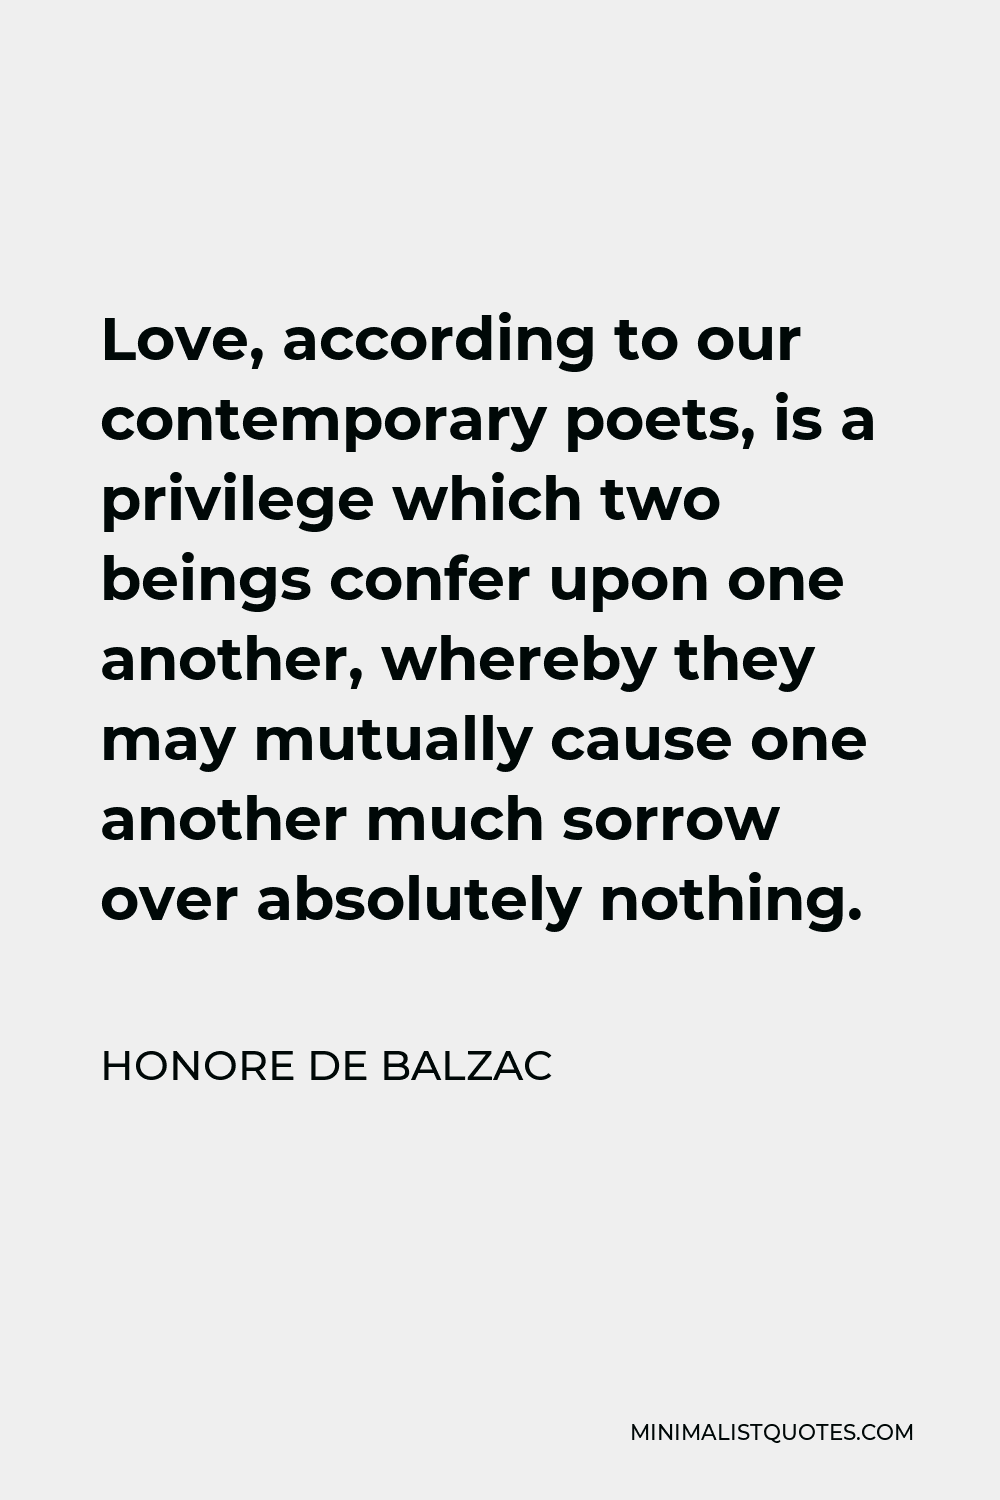 Honore de Balzac Quote - Love, according to our contemporary poets, is a privilege which two beings confer upon one another, whereby they may mutually cause one another much sorrow over absolutely nothing.